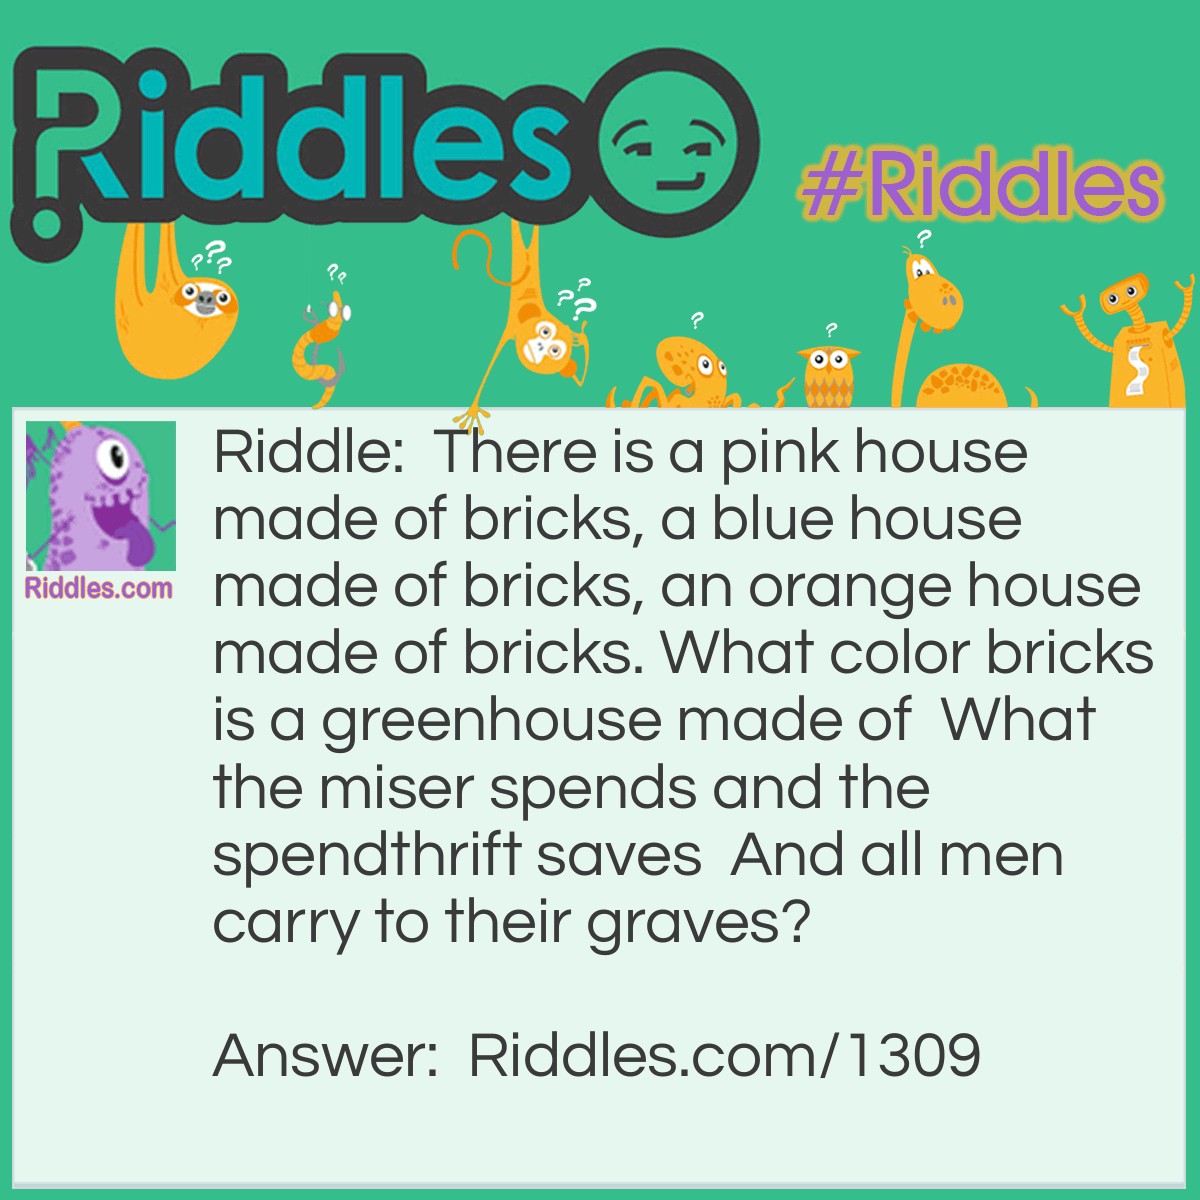 Riddle: There is a pink house made of bricks, a blue house made of bricks, an orange house made of bricks. What color bricks is a greenhouse made of?  Answer: A greenhouse is made of glass or plastic, not bricks